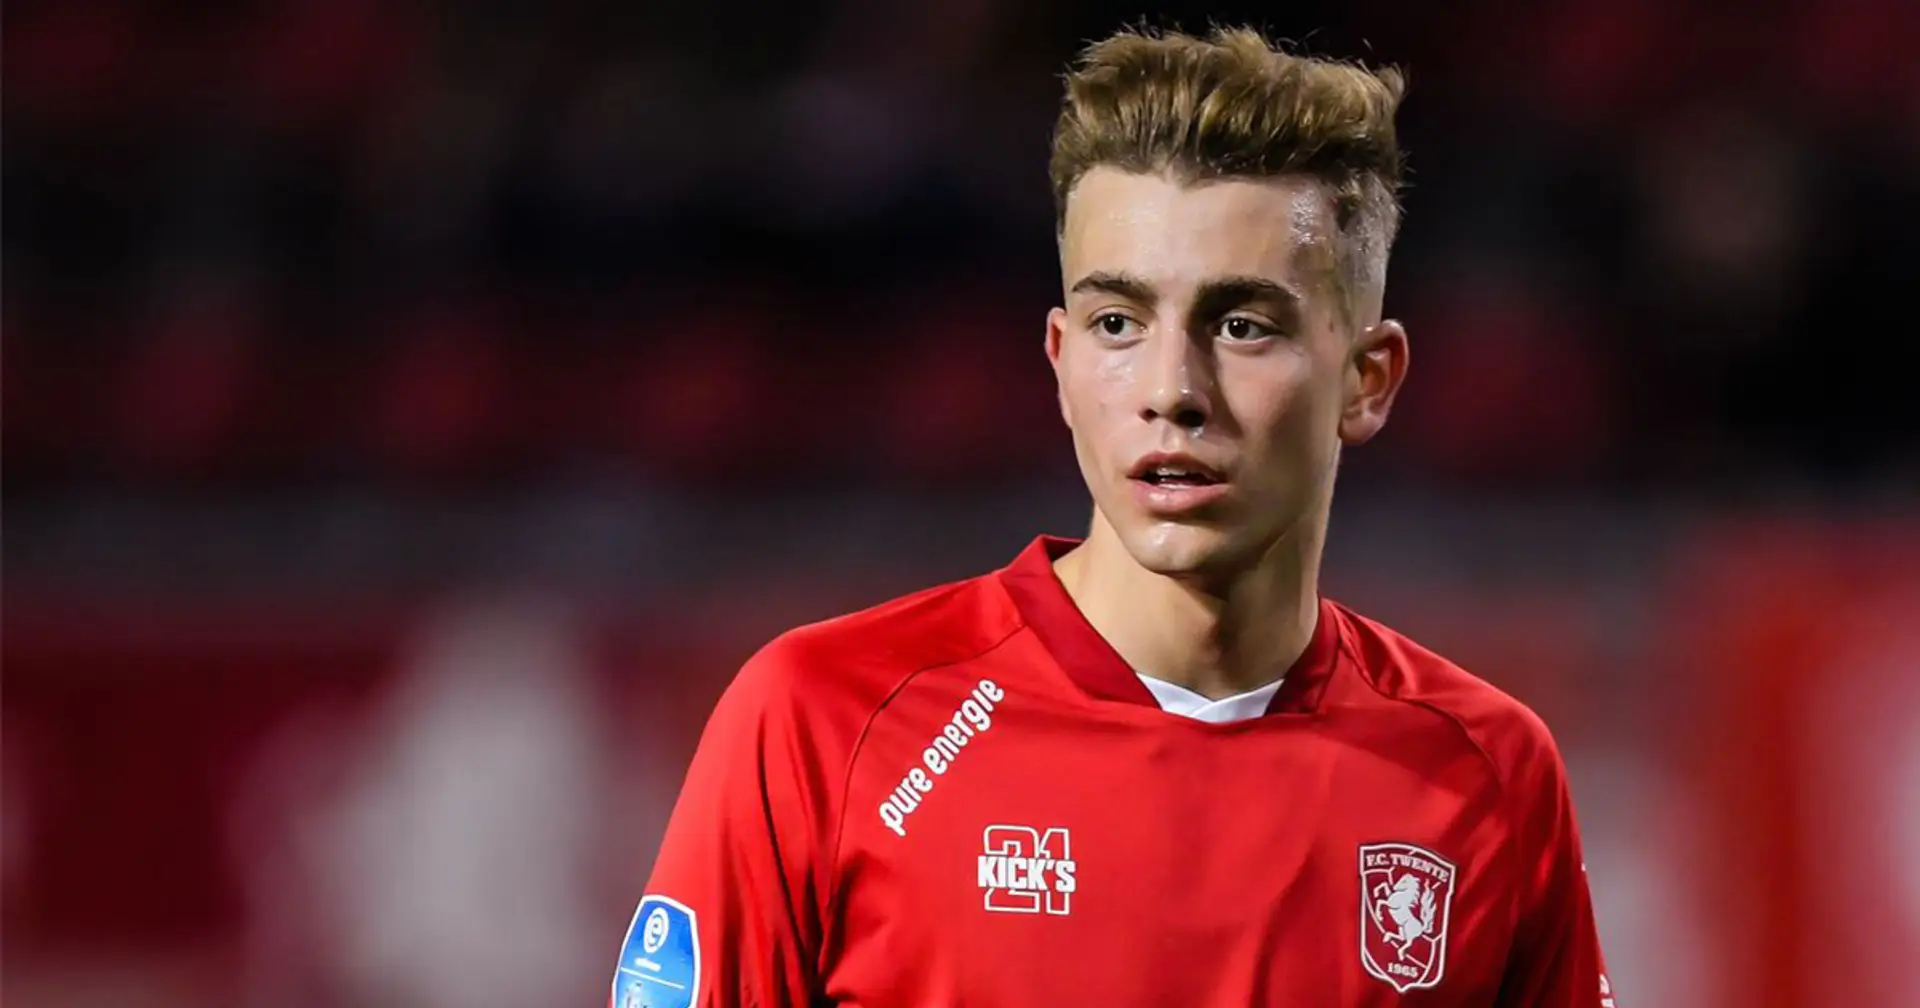 Oriol Busquets: 'If it's to play for Barca, I don't mind if it's in the middle or at the back'